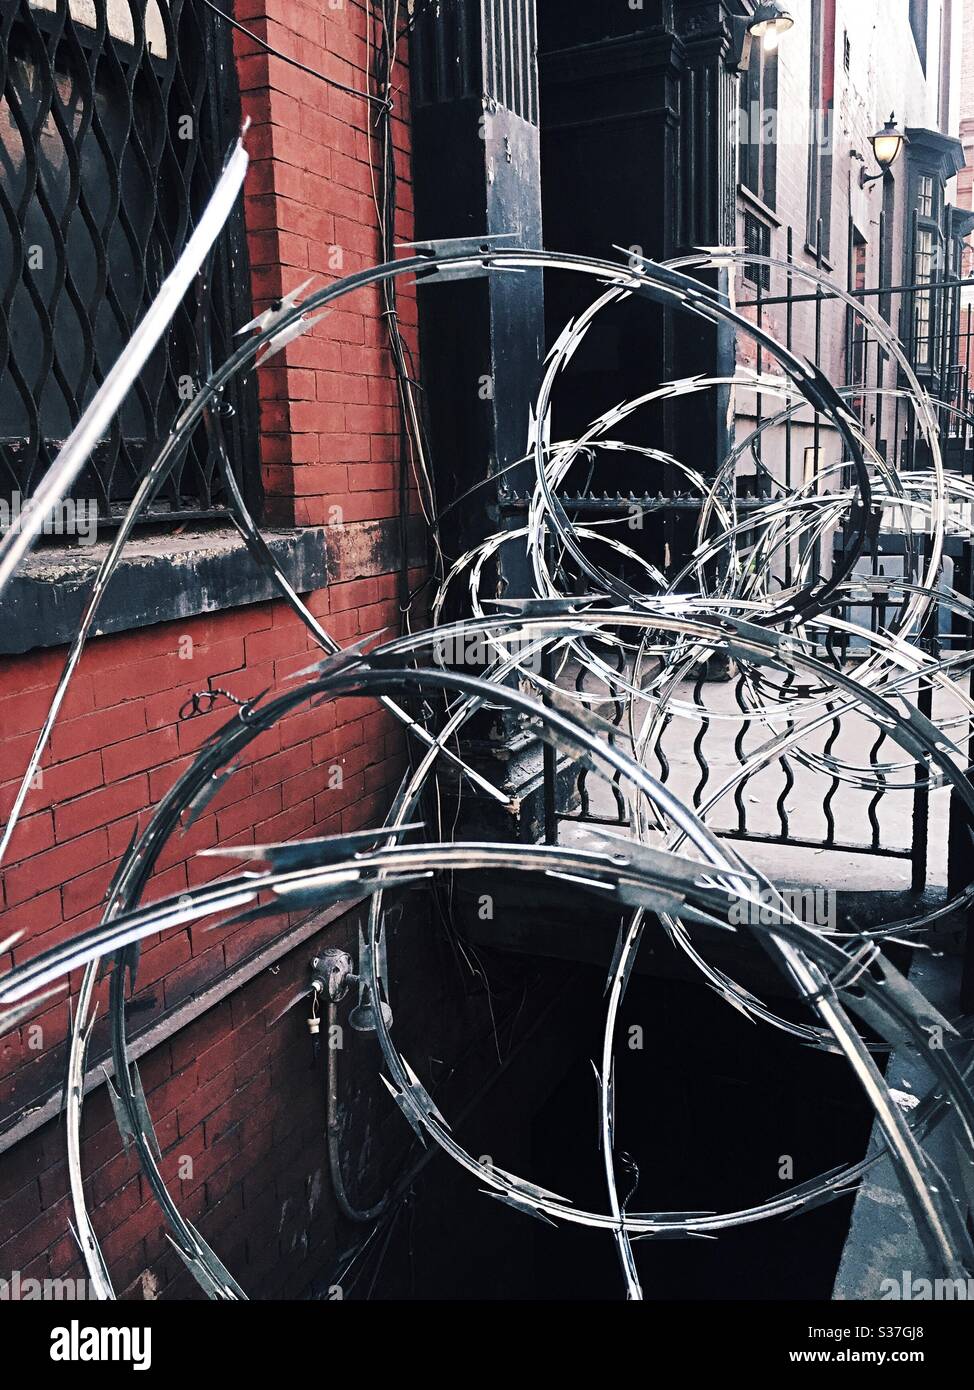 Concertina wire placed in building entrances as a result of rioting and looting, June 2020, New York City, United States Stock Photo